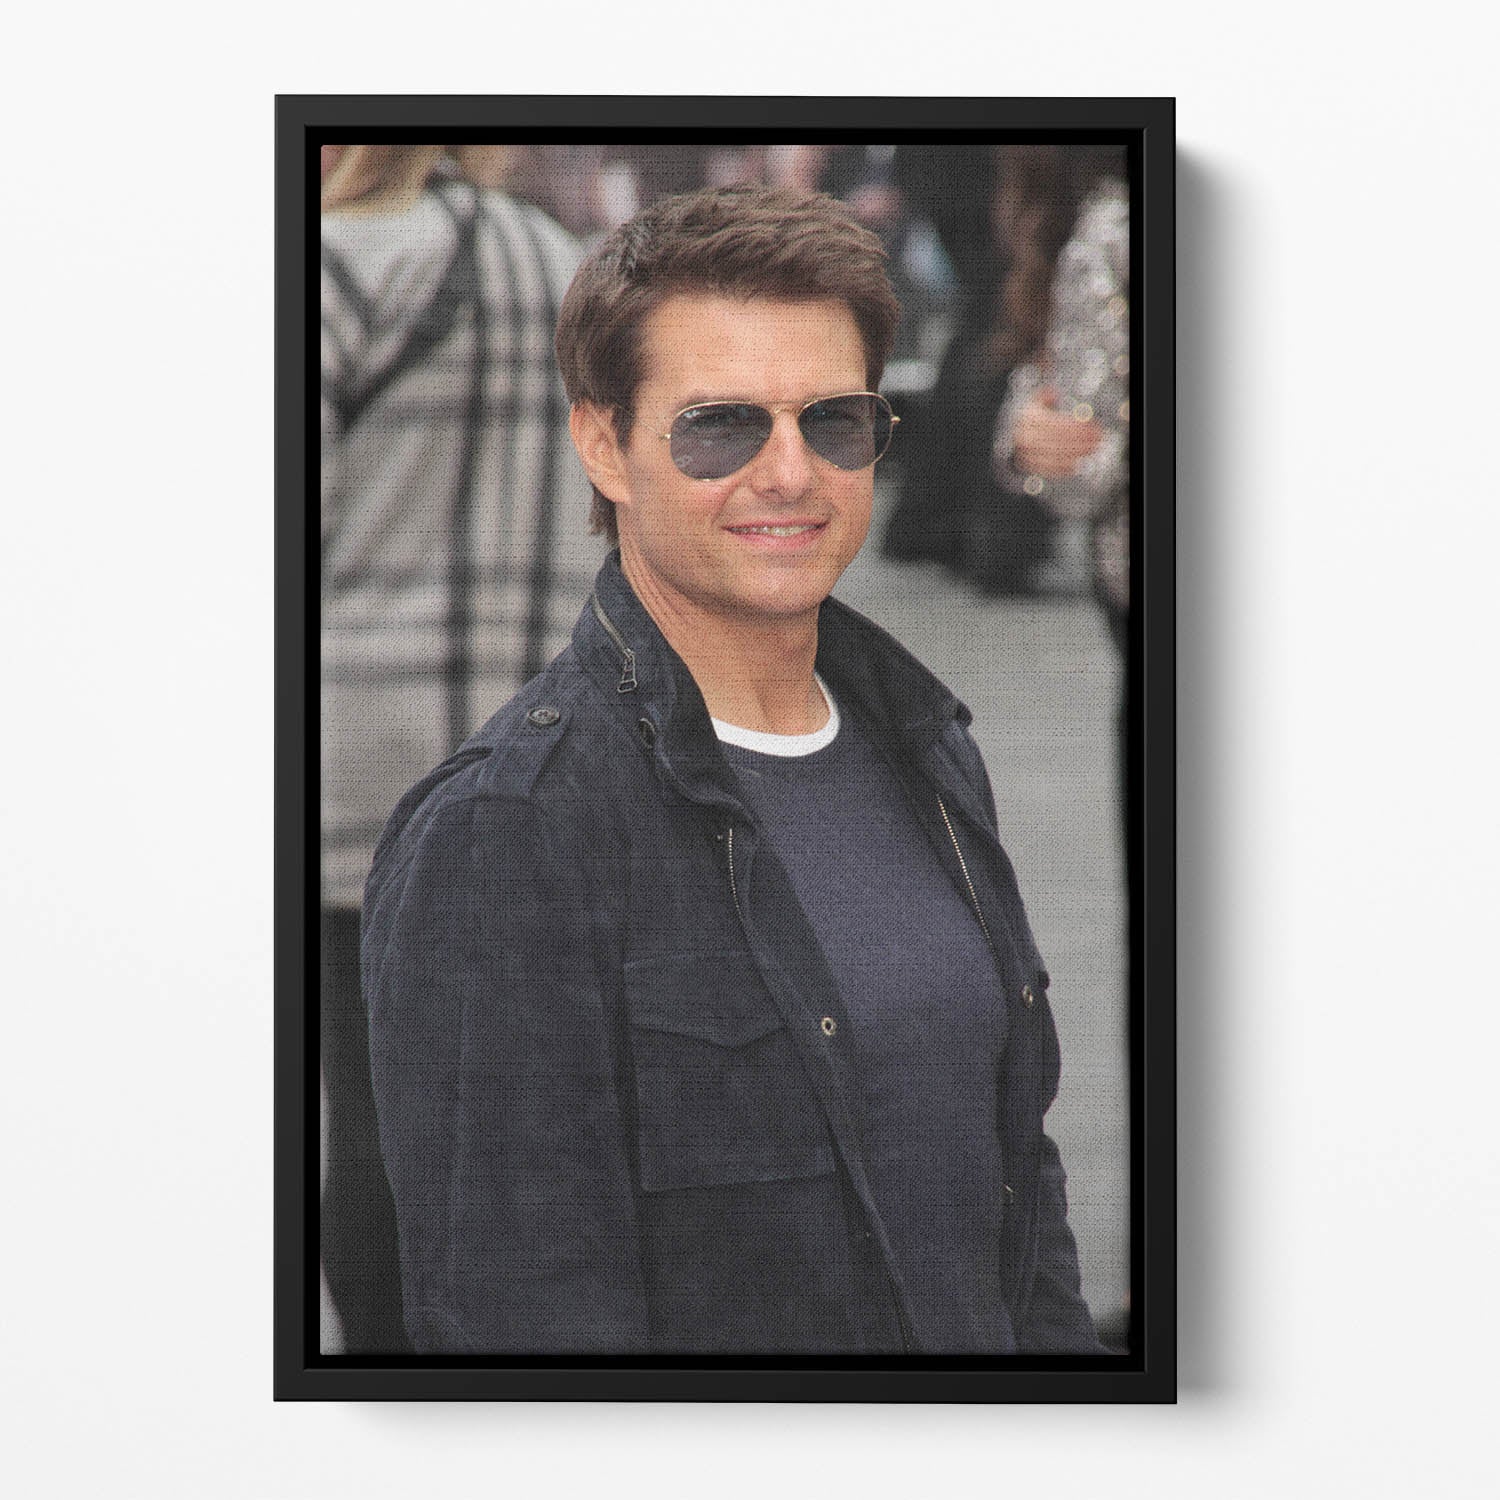 Tom Cruise in sunglasses Floating Framed Canvas